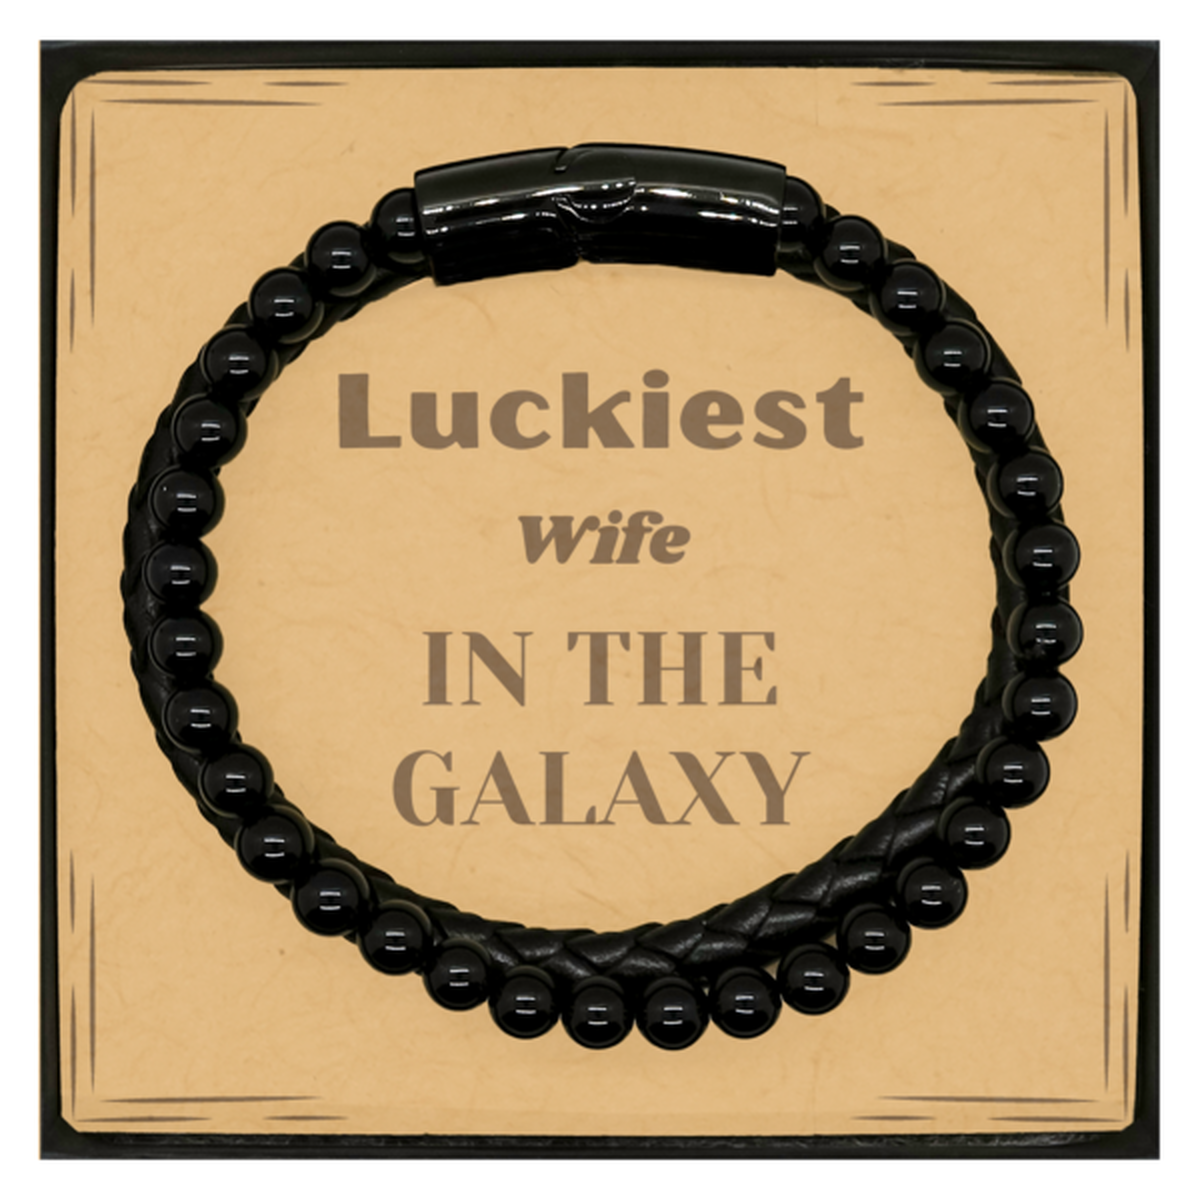 Luckiest Wife in the Galaxy, To My Wife Message Card Gifts, Christmas Wife Stone Leather Bracelets Gifts, X-mas Birthday Unique Gifts For Wife Men Women